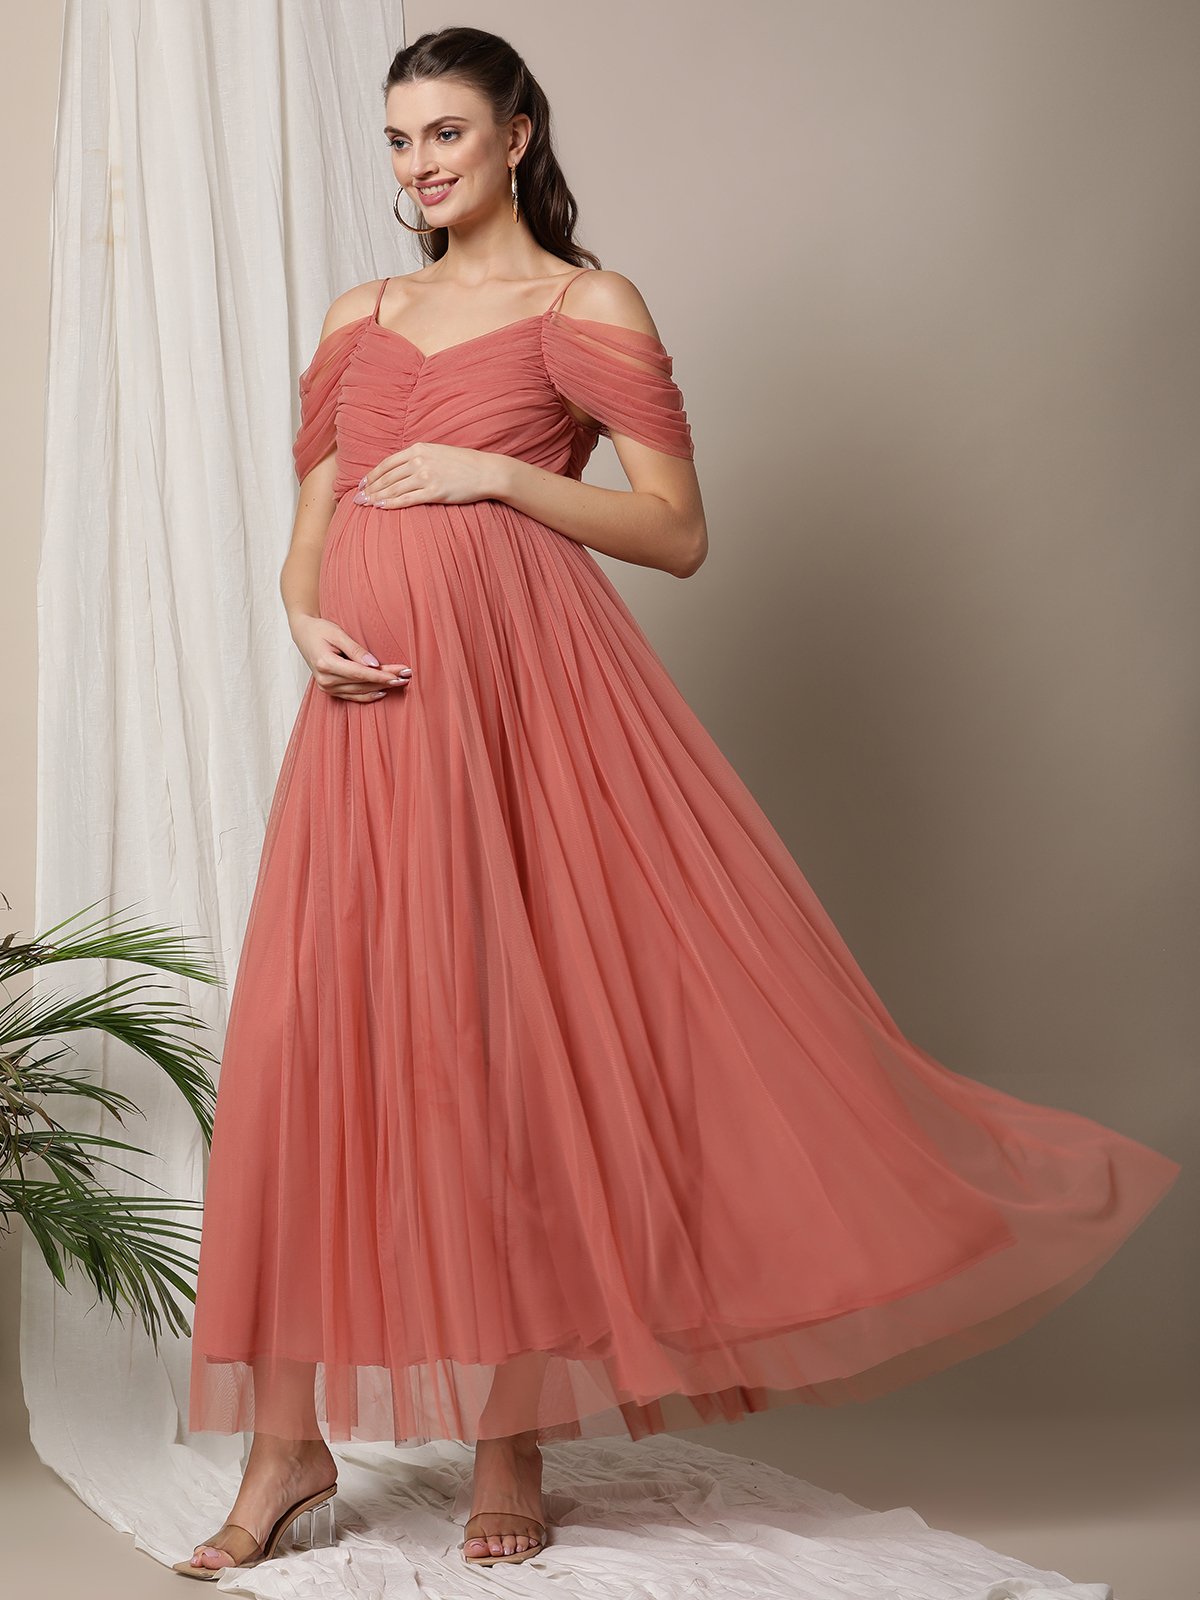 Frida Mom Labor and Delivery Gown, Maternity & Postpartum Nursing Gown,  Jersey Nightgown, One Size - Walmart.com